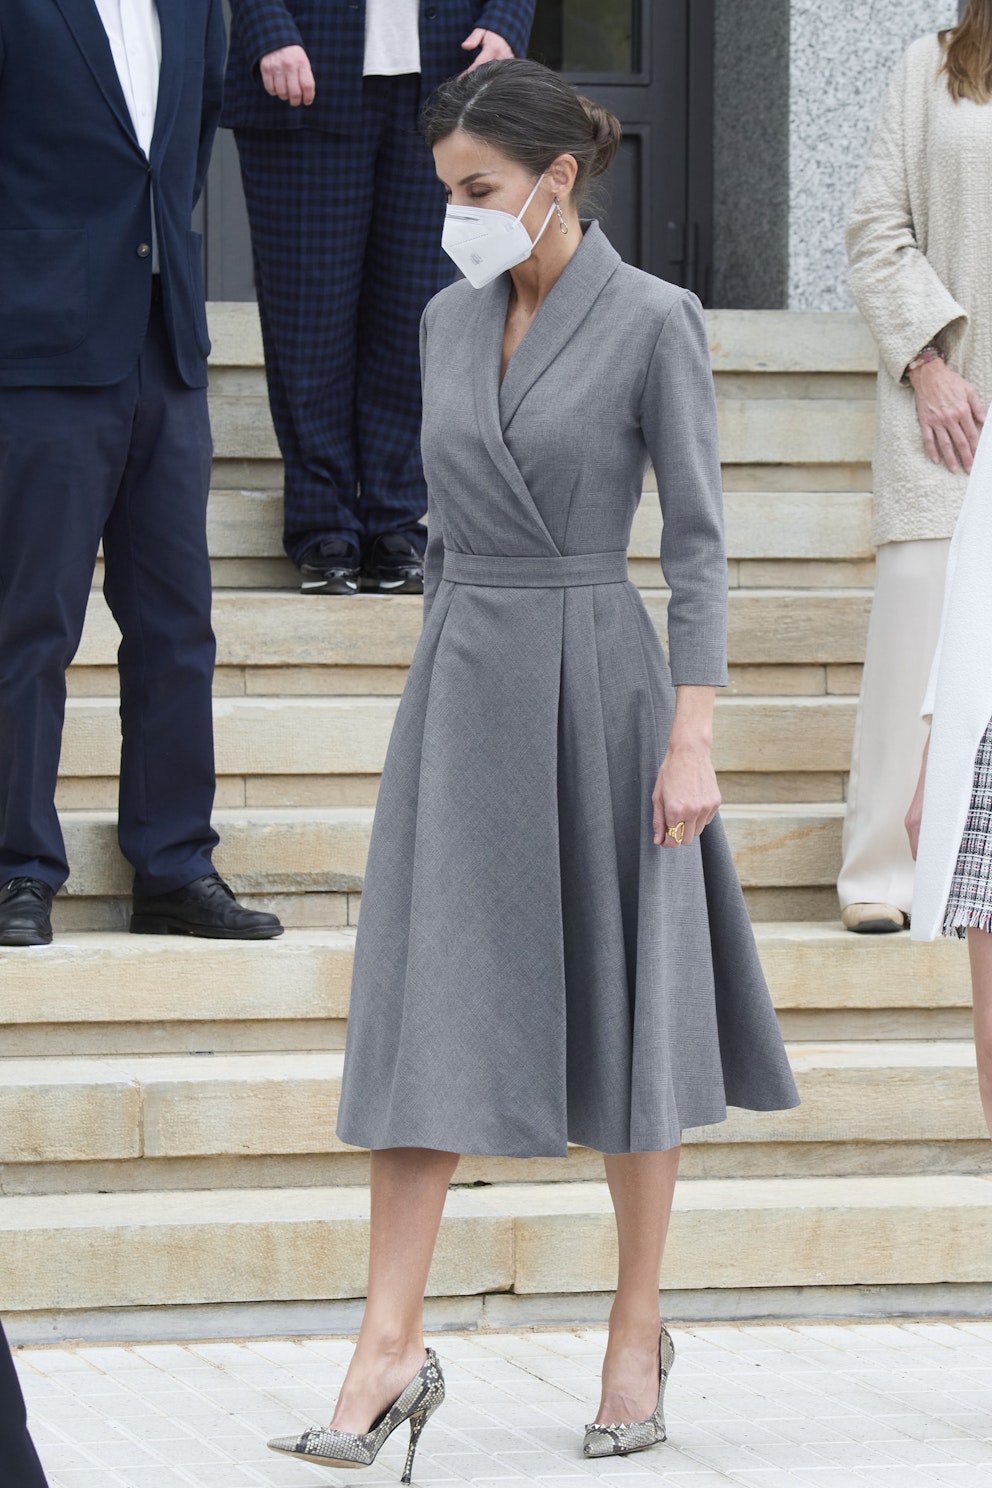 Queen Letizia Style: The Spanish Royal's Best Outfits | Fashion | Grazia